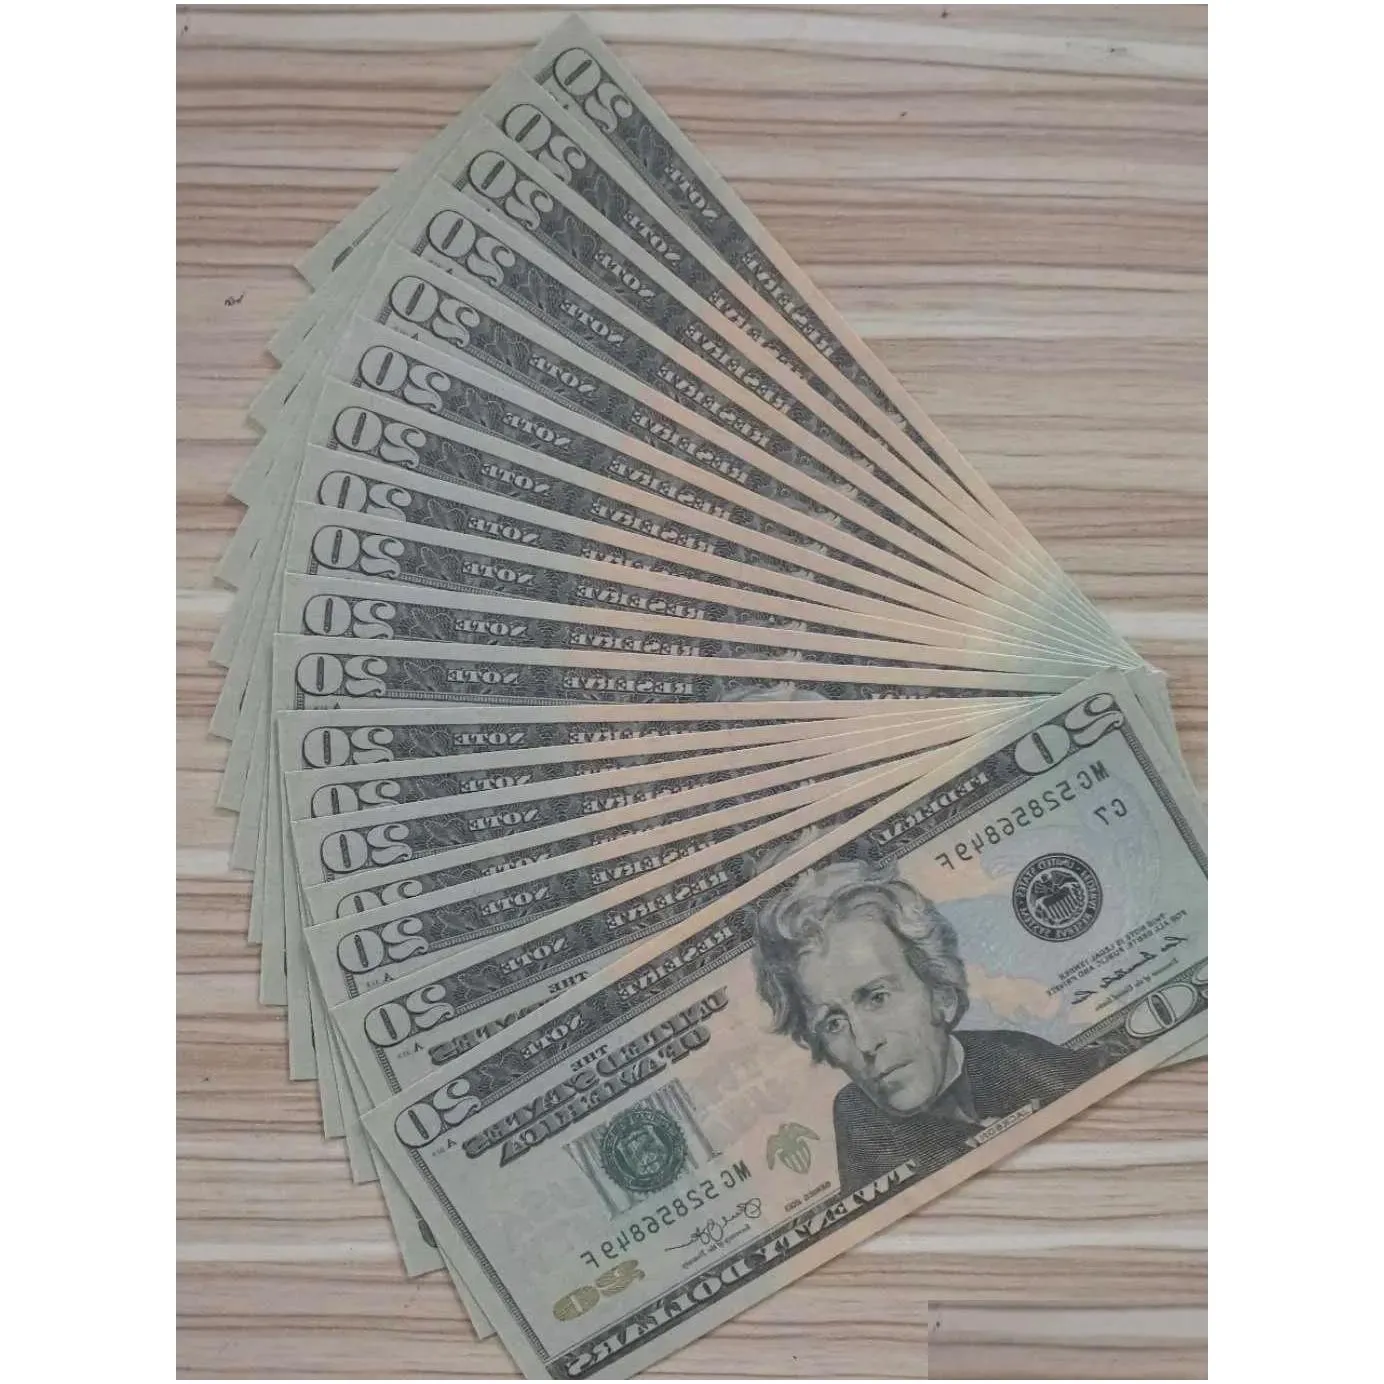 Fake Wholesale Quality Money Counting Best Home 20 Dollor Kids Video For Movie Film Prop 023 Decoration Nnxor